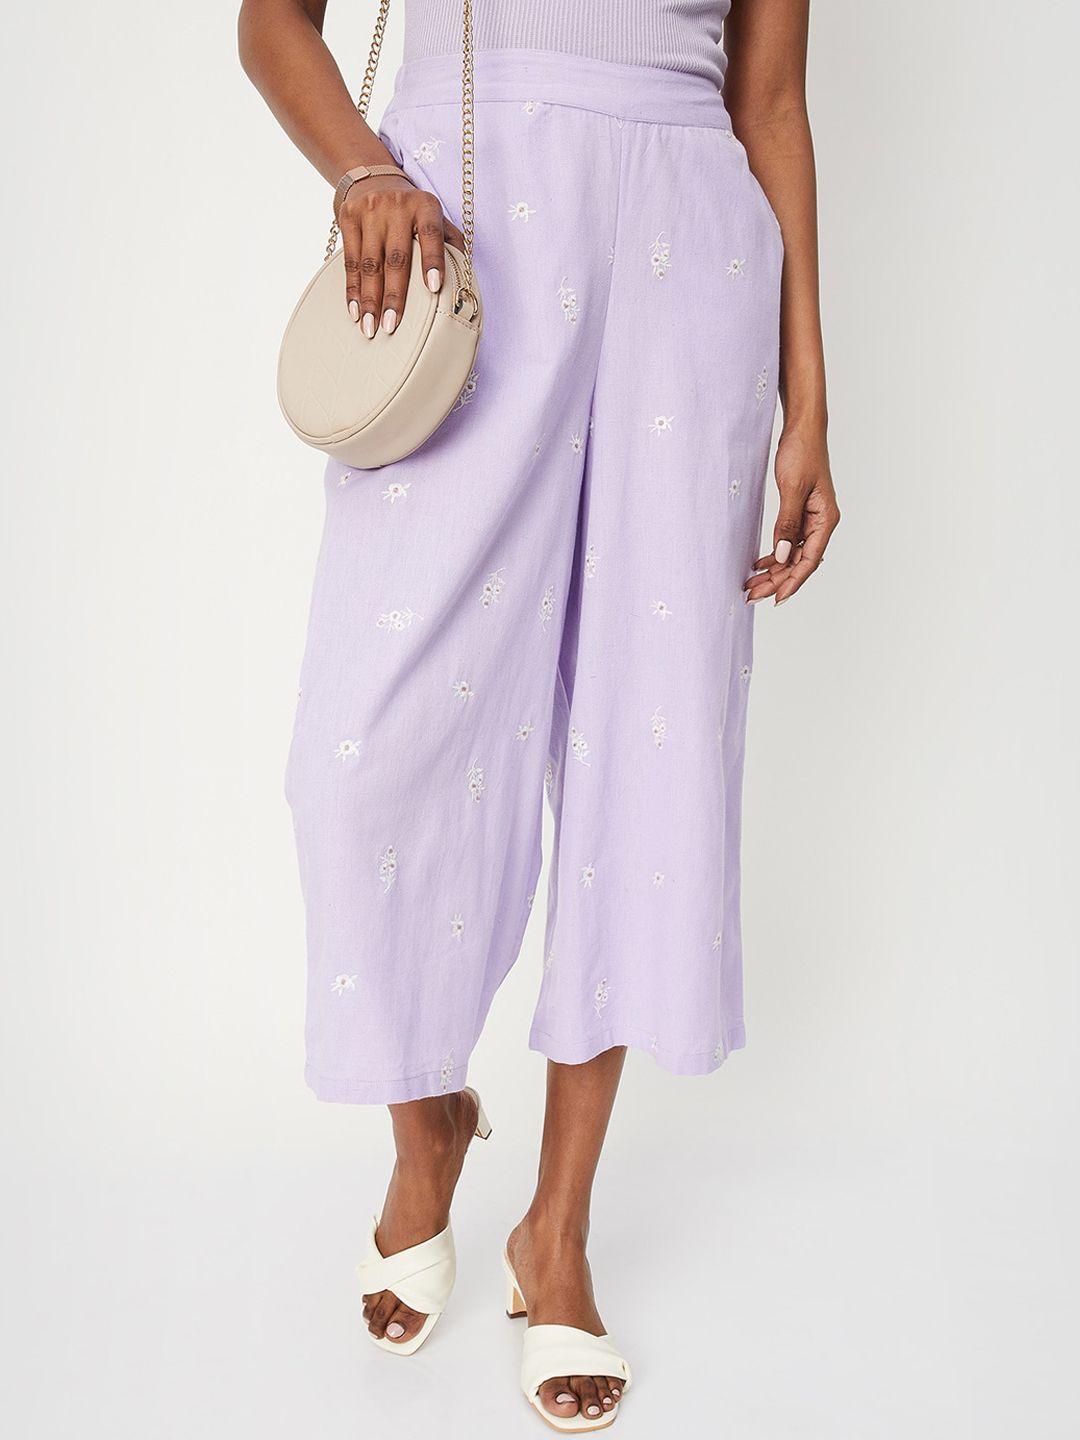 max-women-culottes-trousers